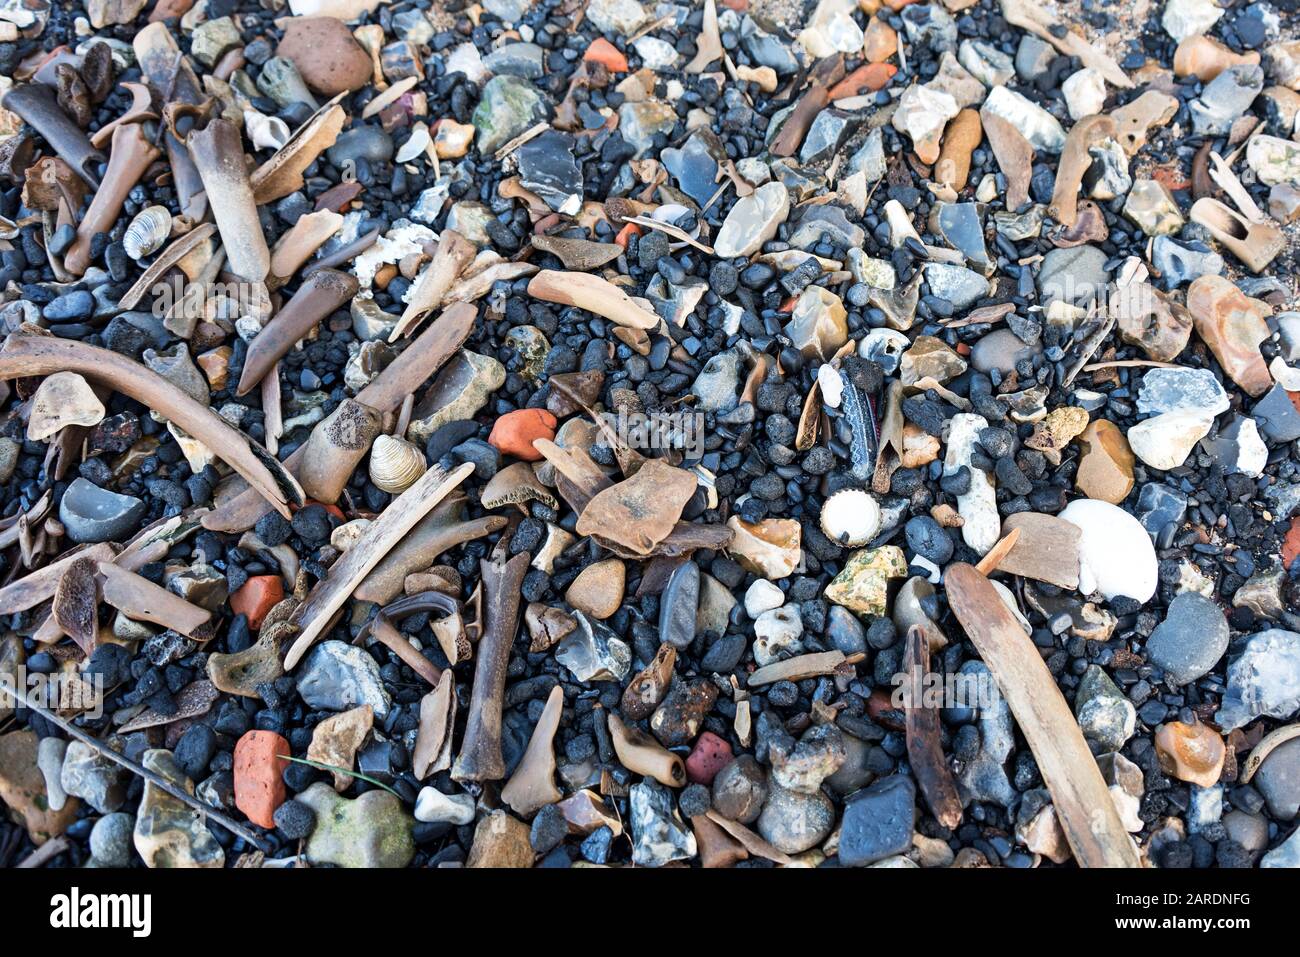 Animal bones and coal washed up on the Thames foreshore, London. Stock Photo